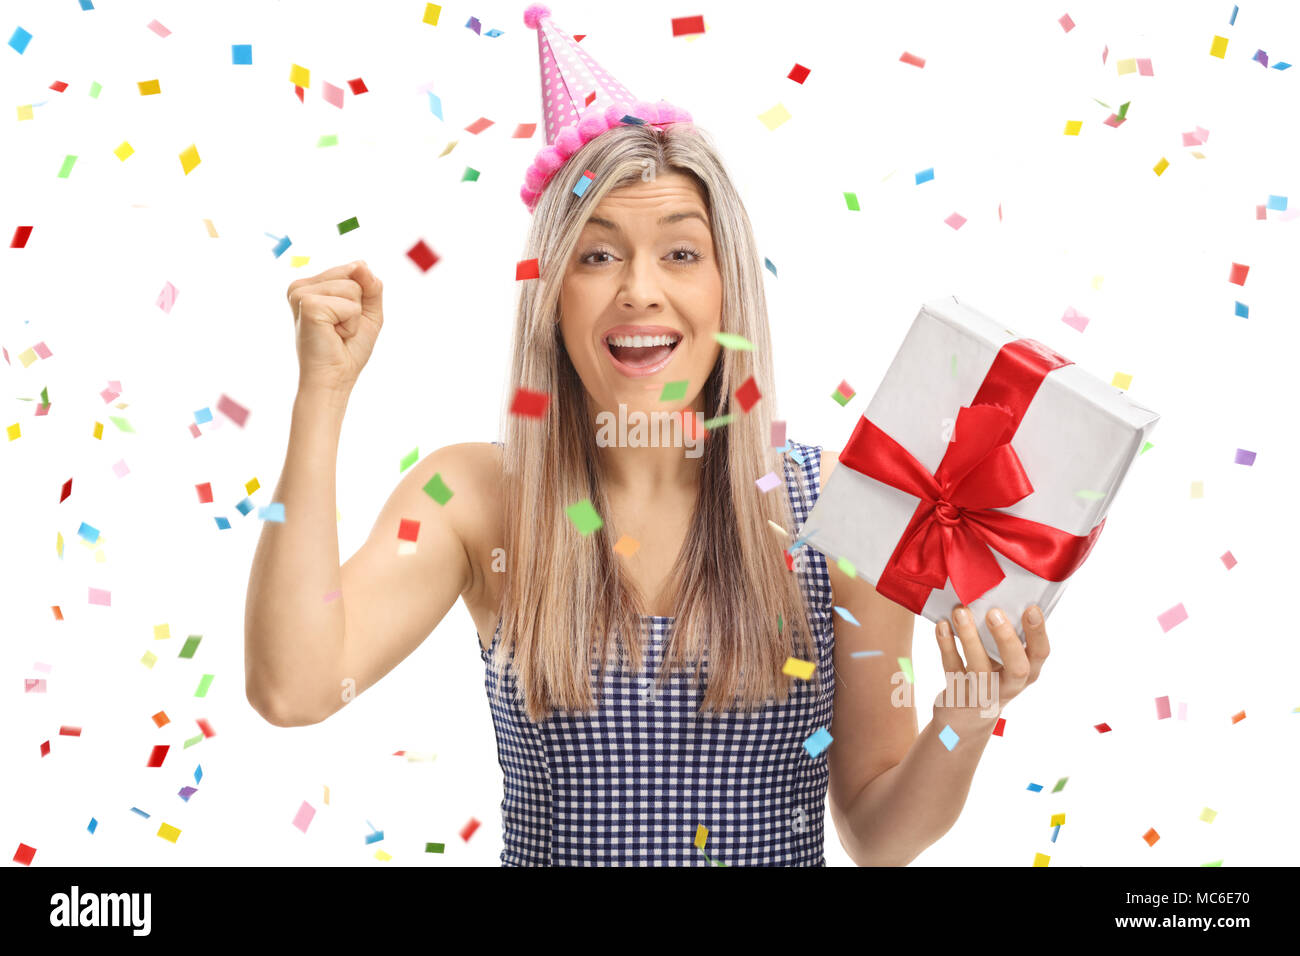 Joyful young woman holding a present with confetti streamers flying around her isolated on white background Stock Photo